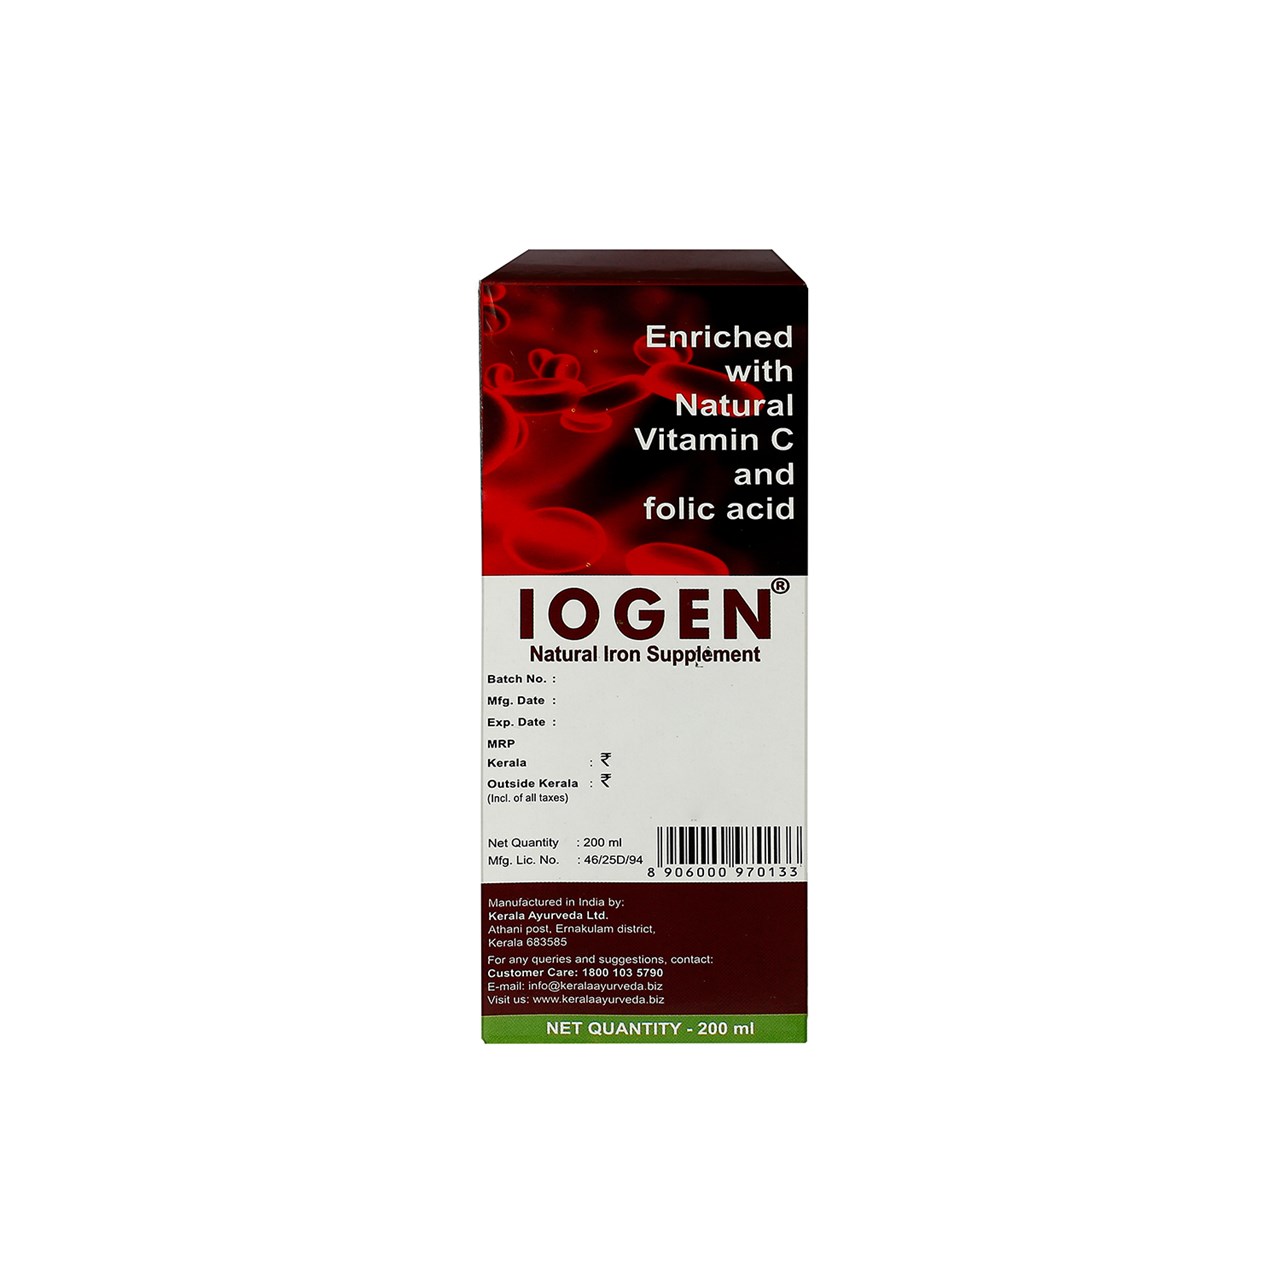 Picture of Kerala Ayurveda Iogen (Syrup) 200 Ml